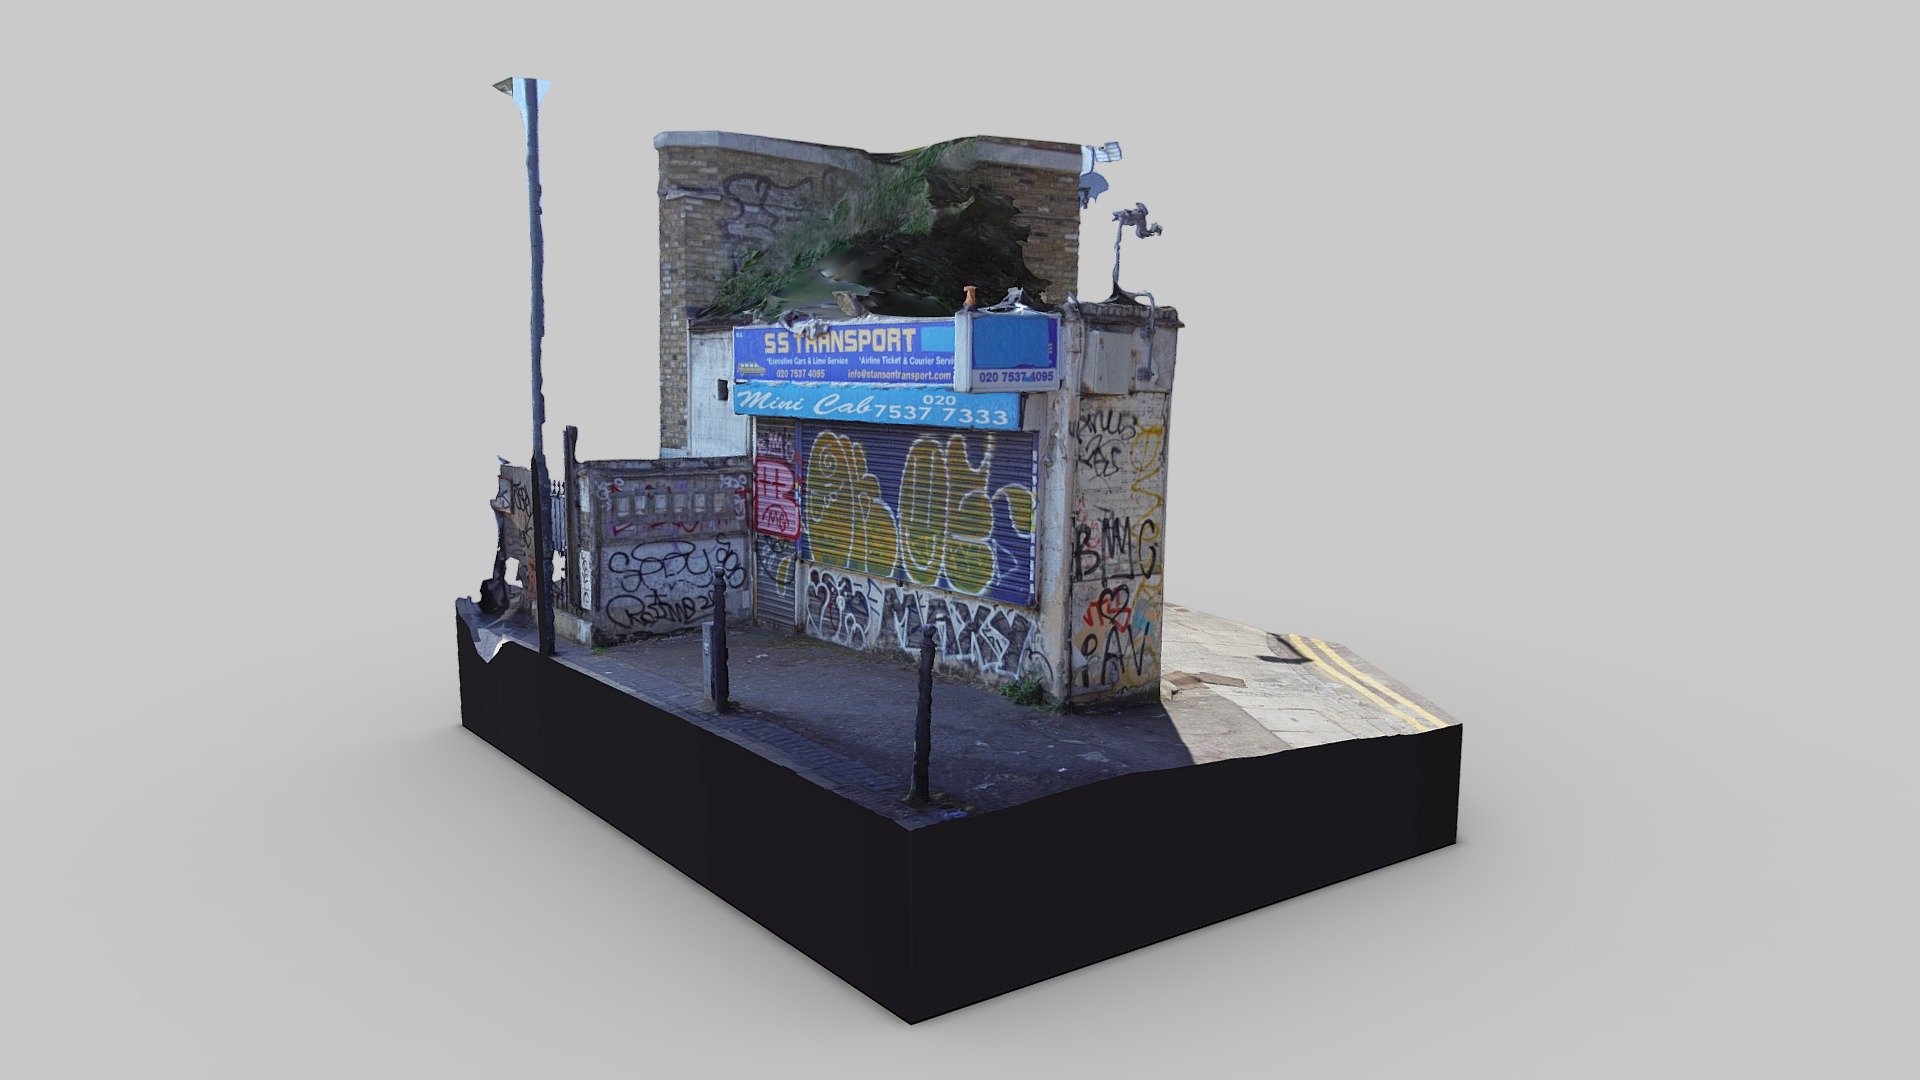 A quick photogrammetry capture of a small building at the junction of East India Dock Road (south side) and Amoy Place (?), Poplar, London.

Scanned because I can see this sort of building being replaced by new development.

95 photos taken in May 2021 with a Sony a6000 and processed in Reality Capture 3d model